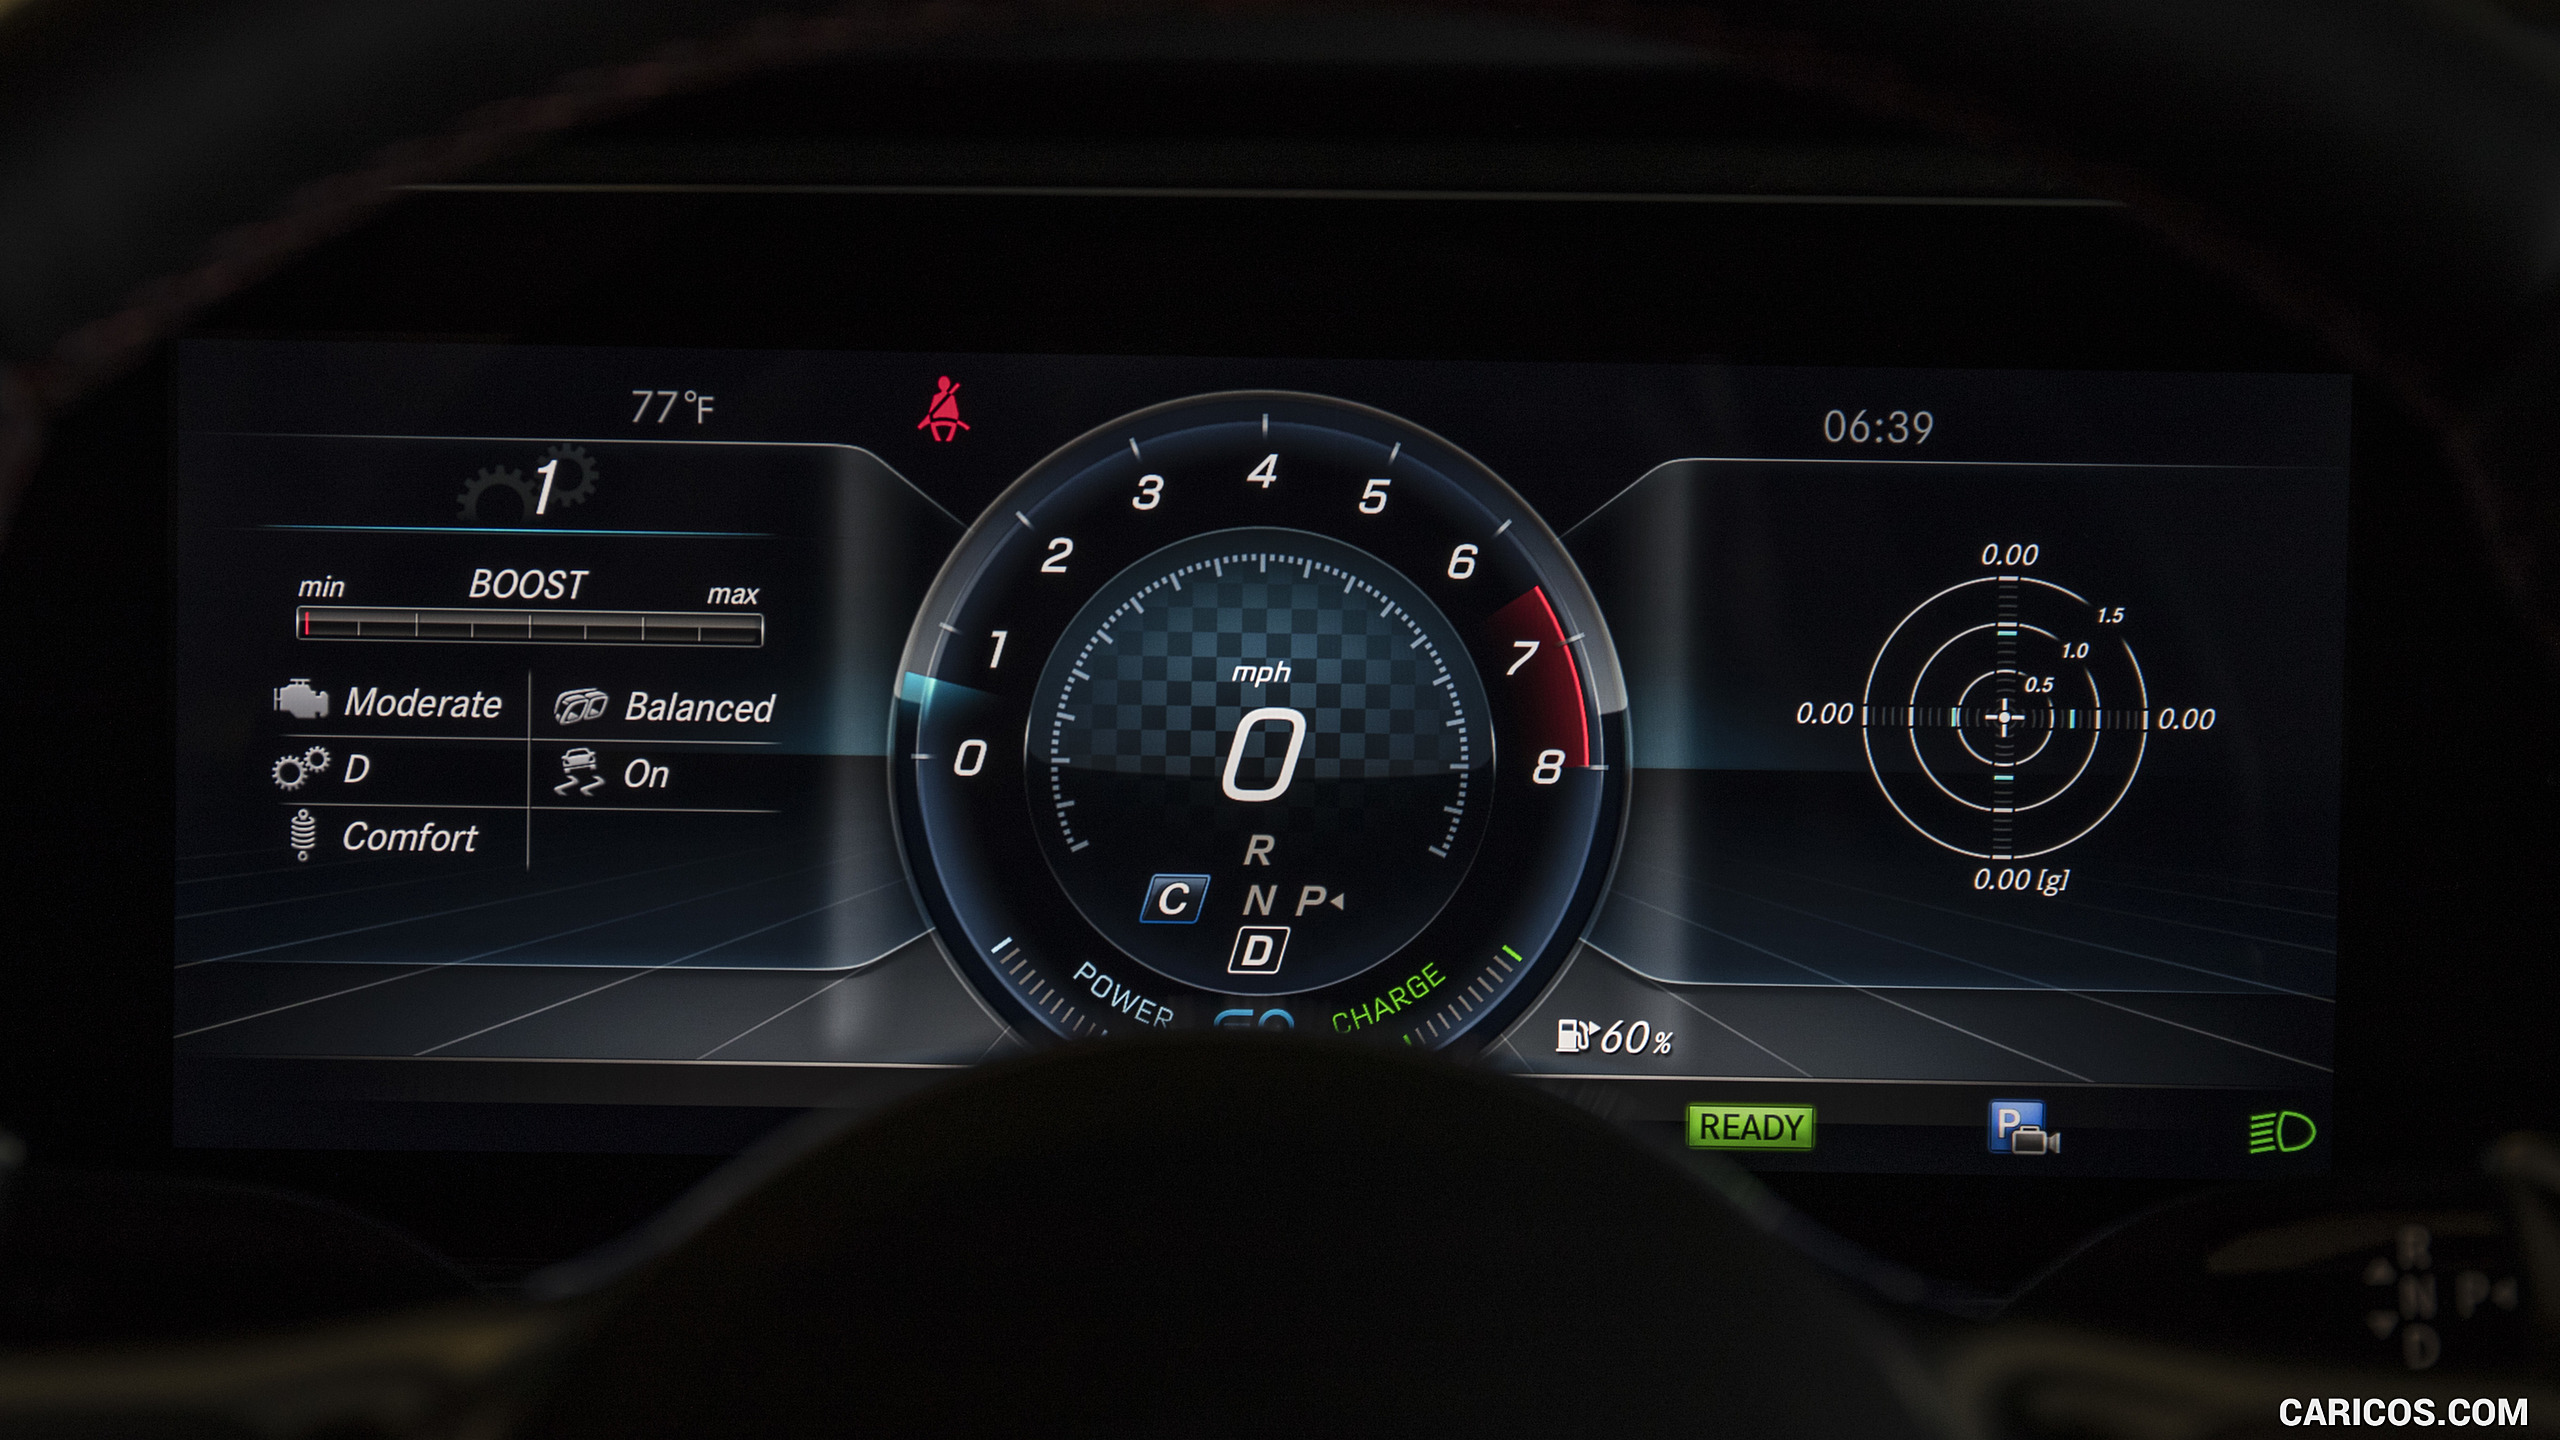 2019 Mercedes-AMG E 53 4MATIC+ Coupe (US-Spec) Wallpaper - Digital Instrument Cluster, #167 of 193